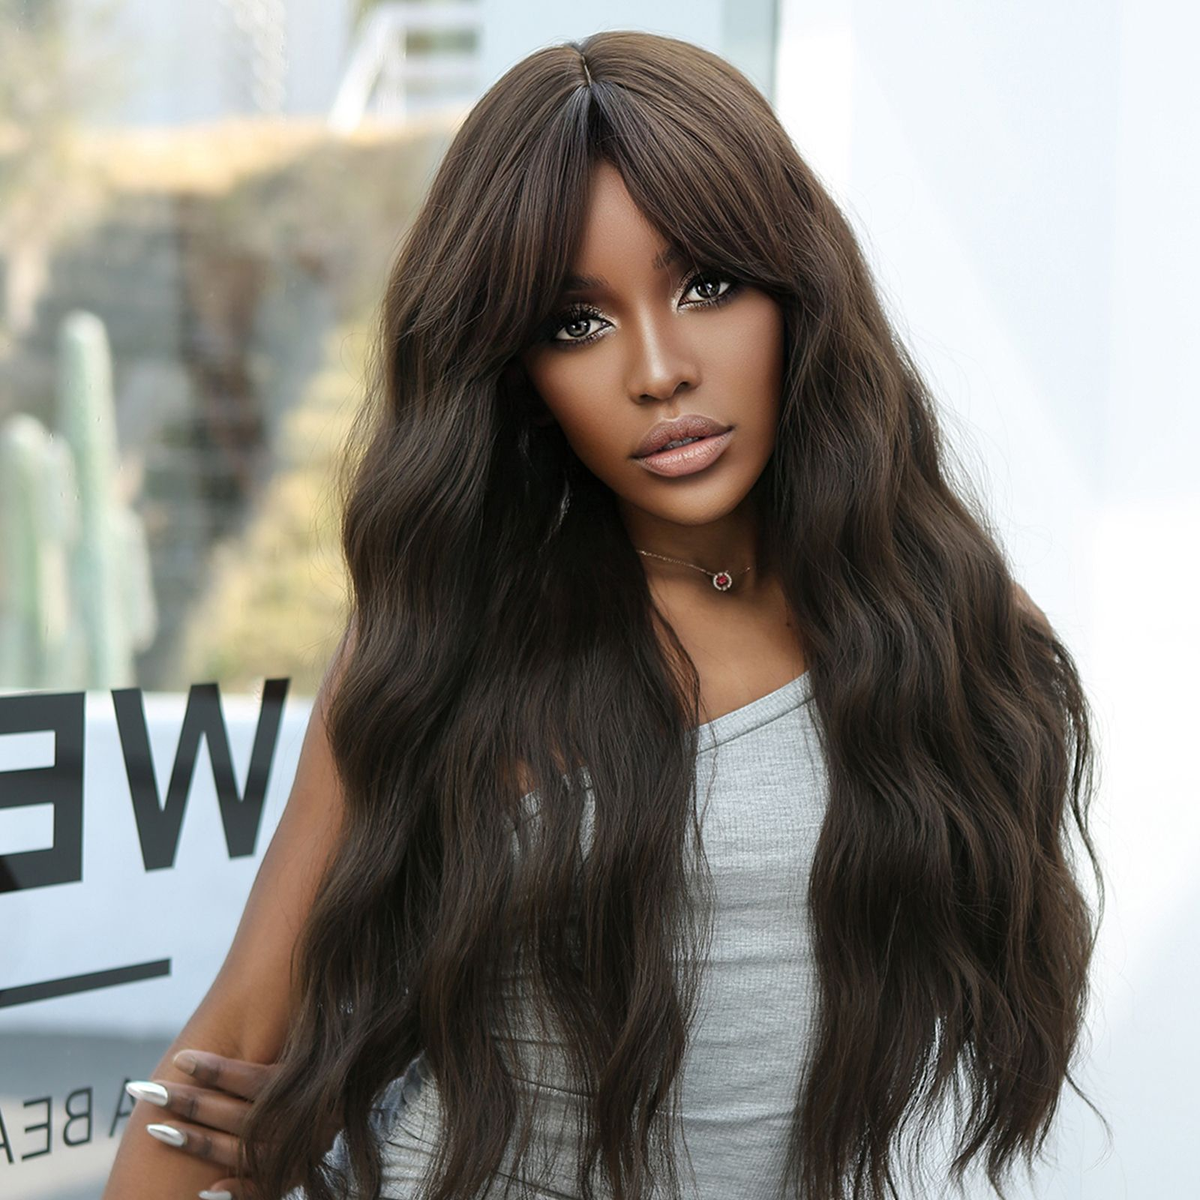 【Gaby】🔥BUY 3 WIG PAY 2 WIG🔥 brown curly wigs with bangs wigs for Women WL1115-1